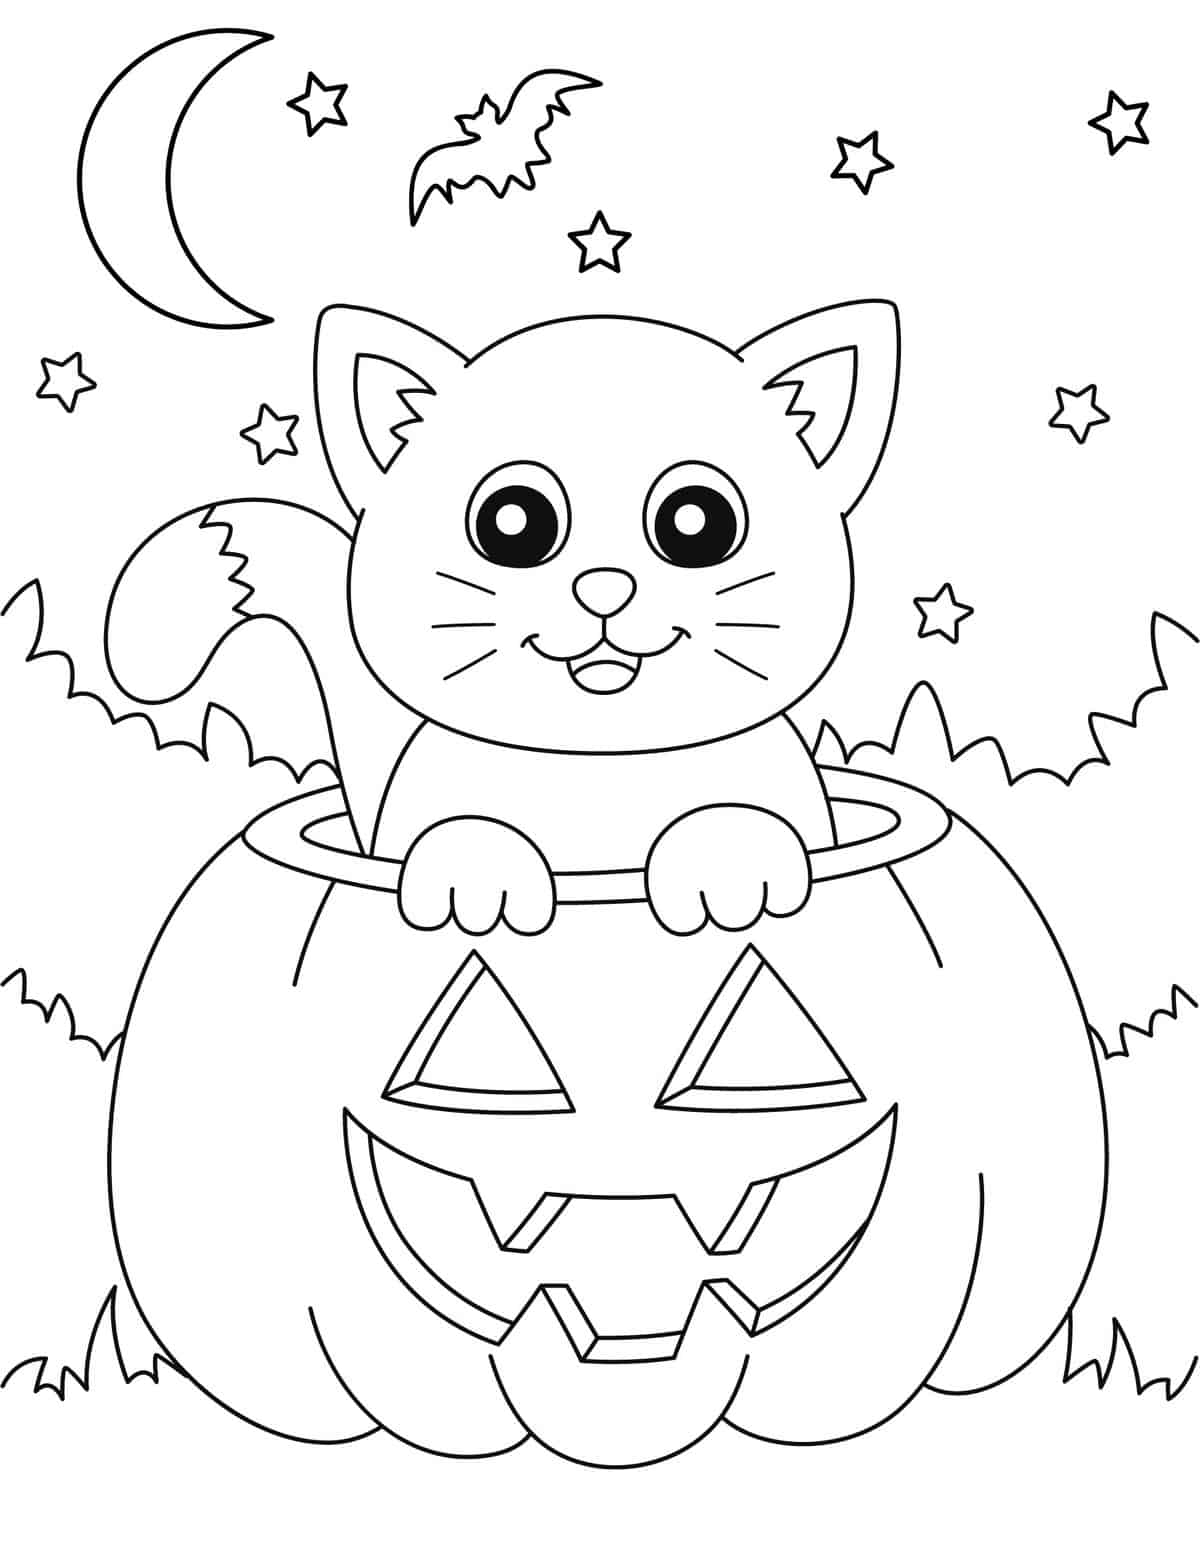 Coloring page of cute cat in jack o lantern for halloween